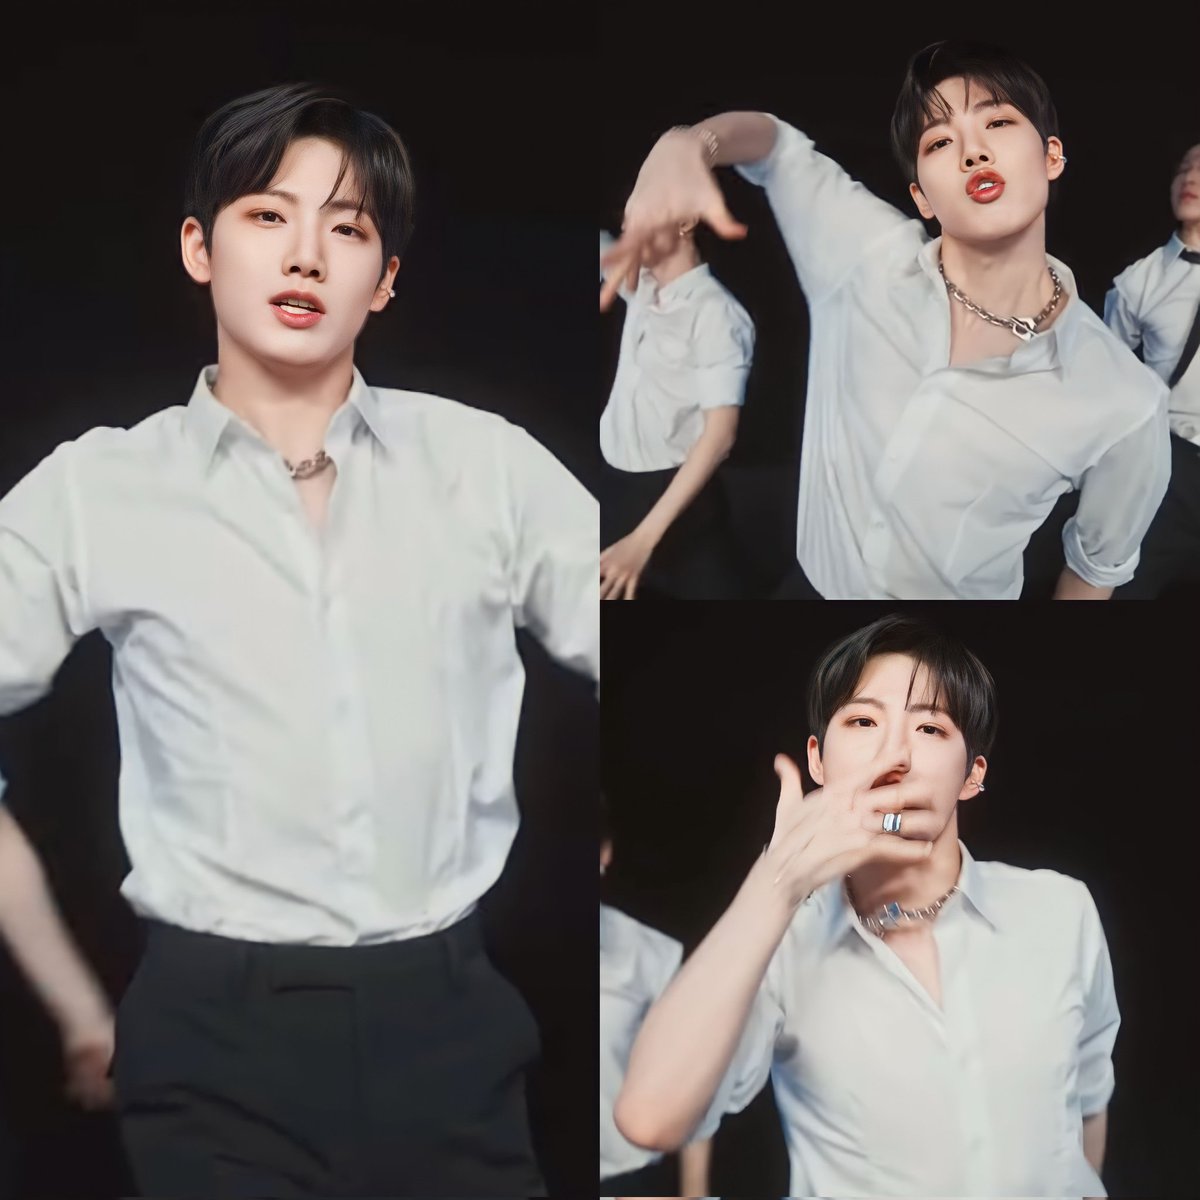 junkyu look so fine I could drink his bath water